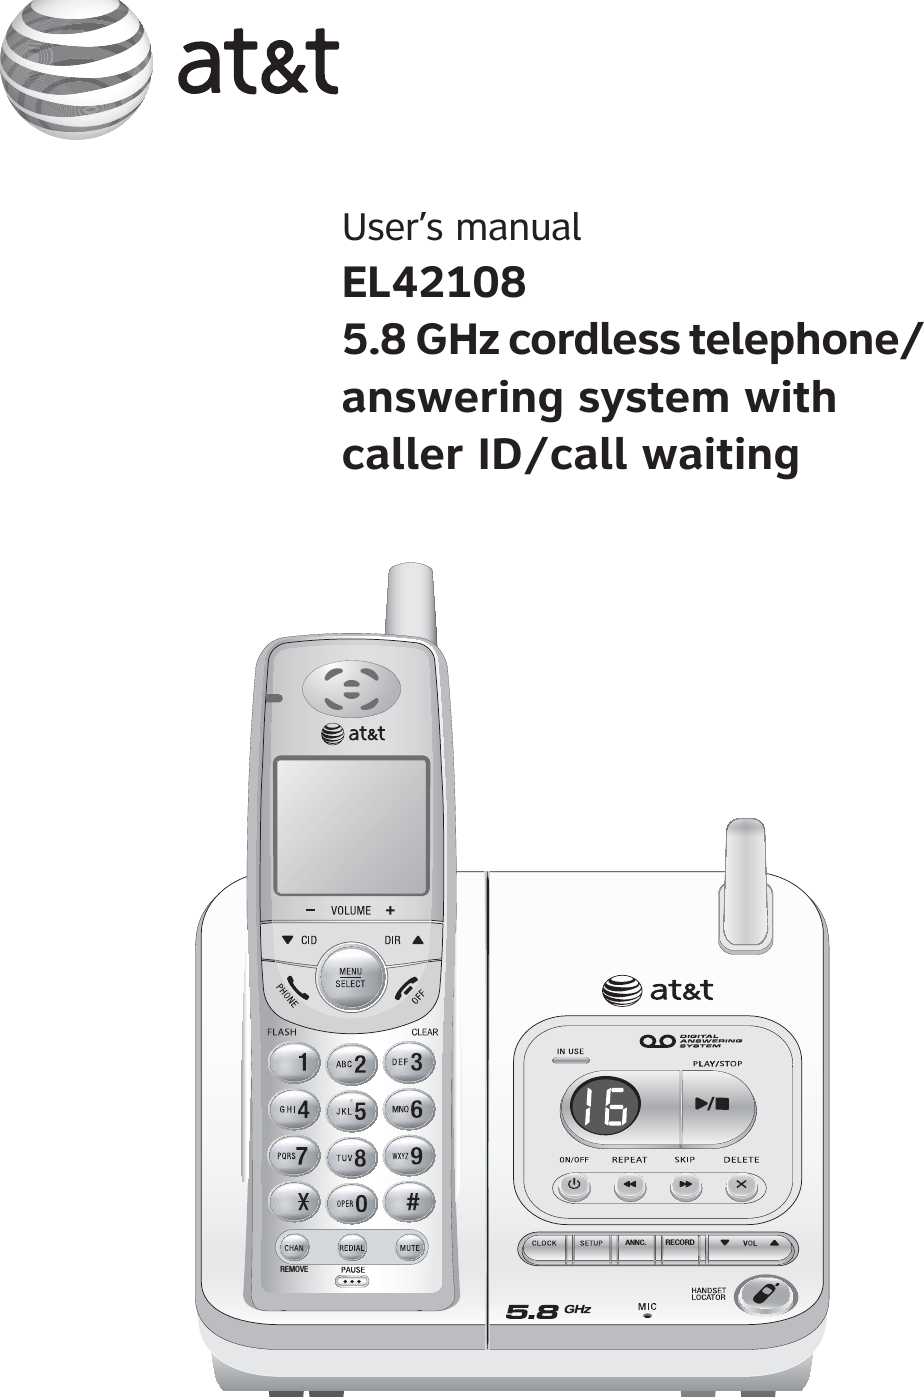 User’s manualEL421085.8 GHz cordless telephone/answering system withcaller ID/call waitingRECORDANNC.REMOVE